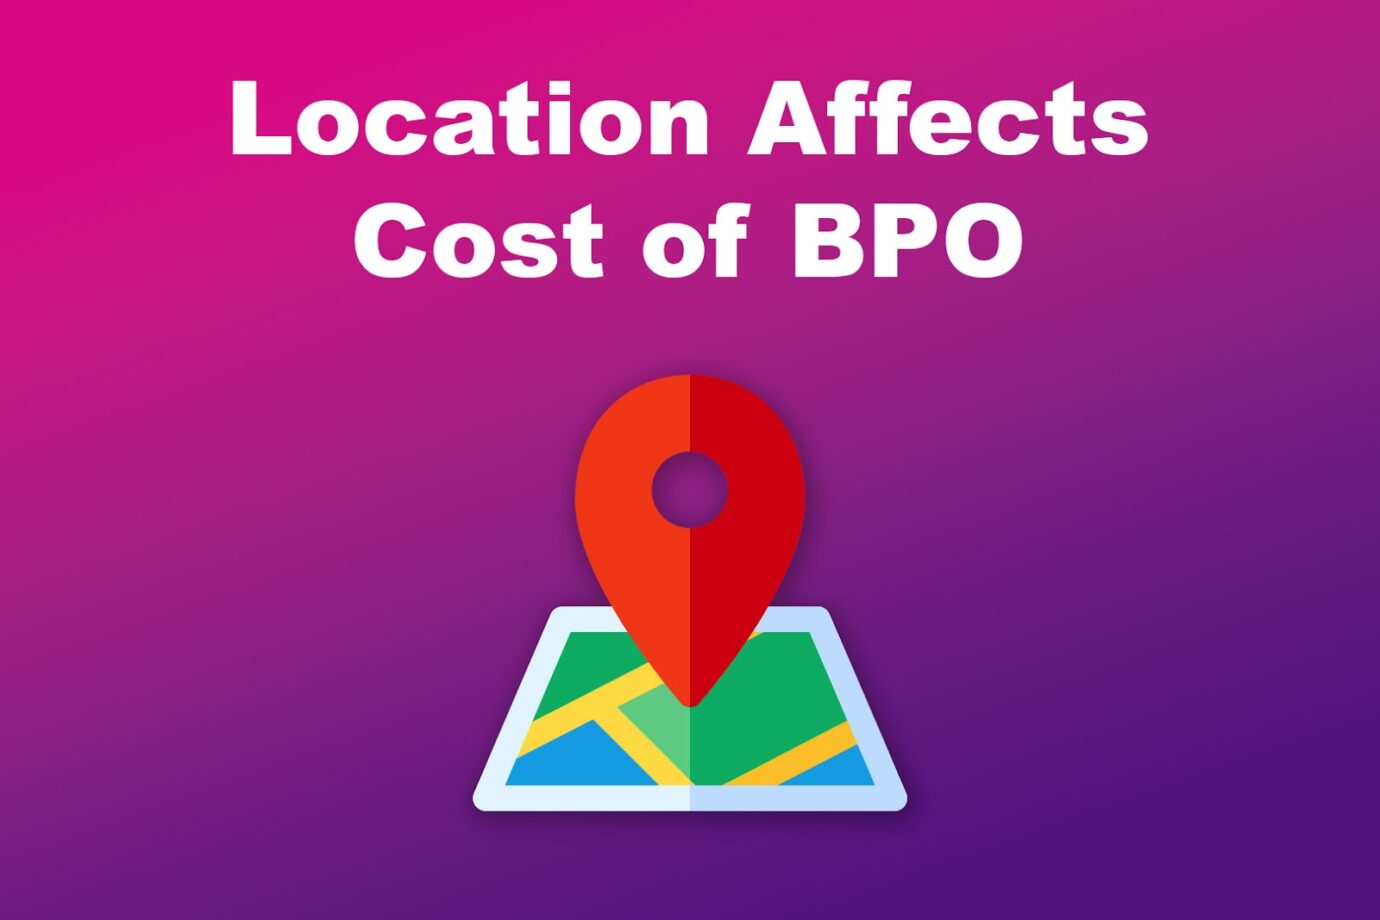 Location Affects Cost of BPO